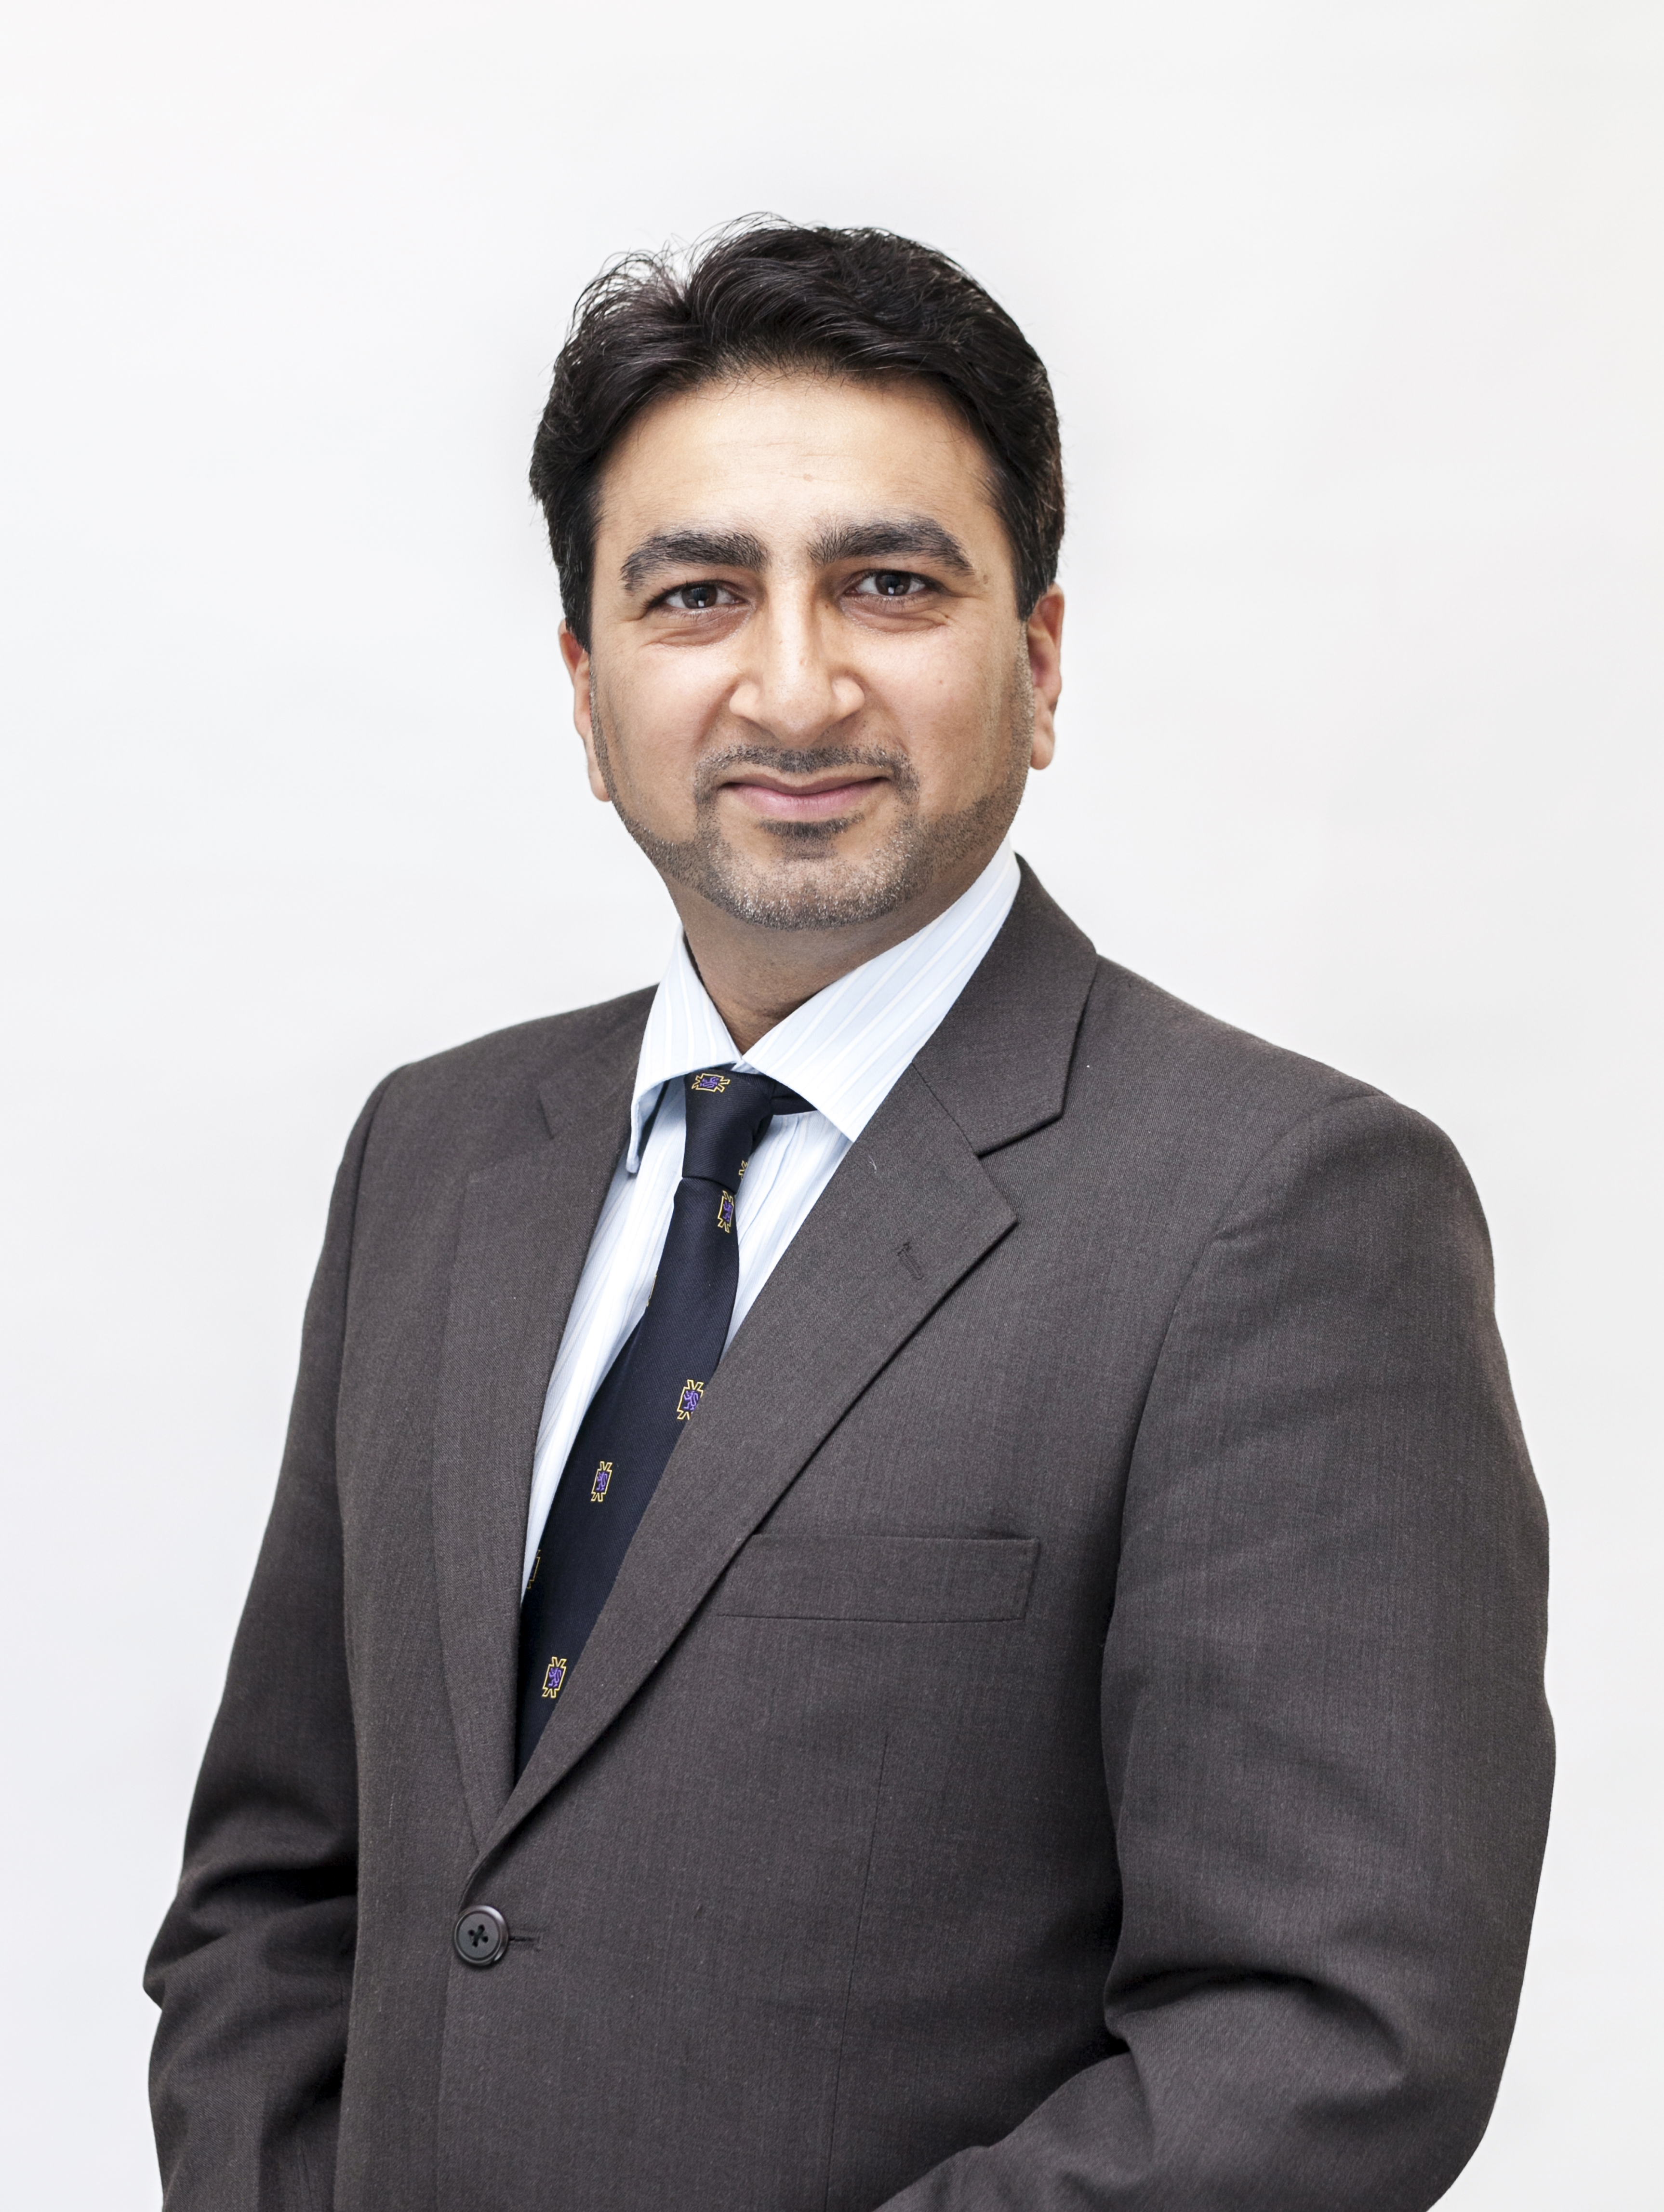 Legal Awards Winner general counsel commercial barrister Tahir Ashraf there is no substitute for hard work which has earnt me my reputation amongst solicitors and clients